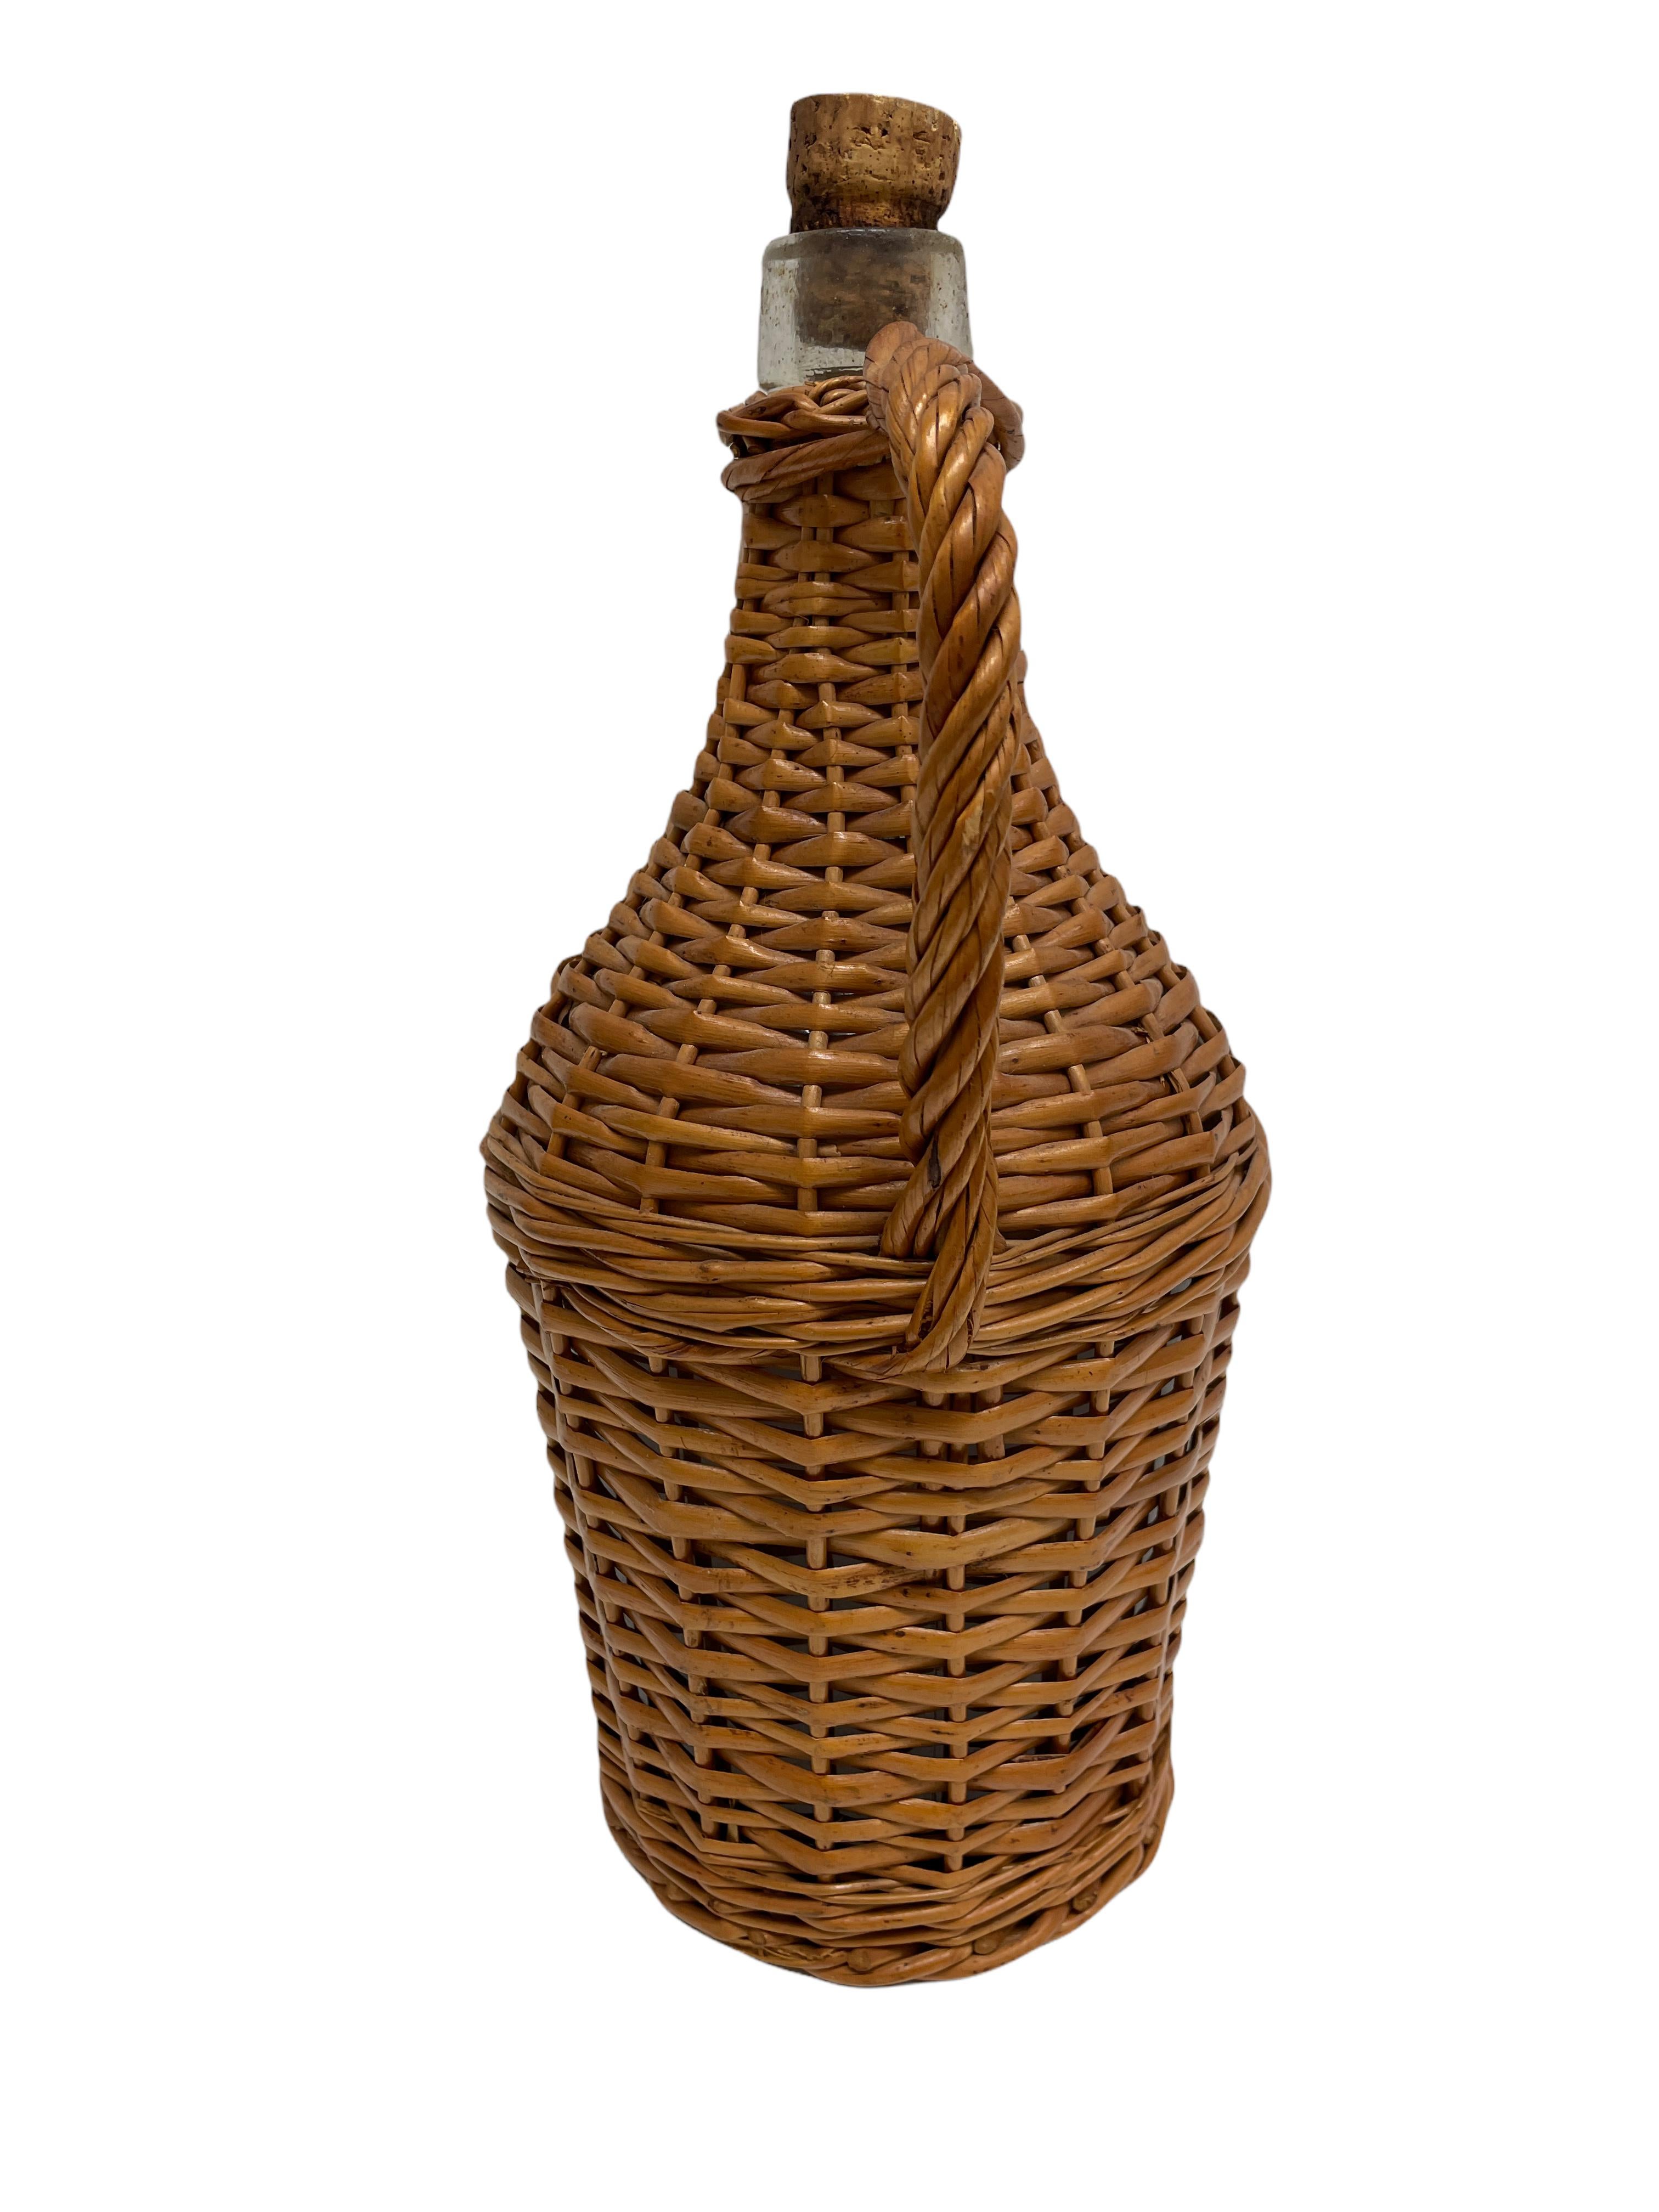 Mid-20th century eye-catching woven basket bottle. Nice addition to your home, patio or garden. This is in used condition, with signs of wear as expected with age and use. A nice addition to every home.